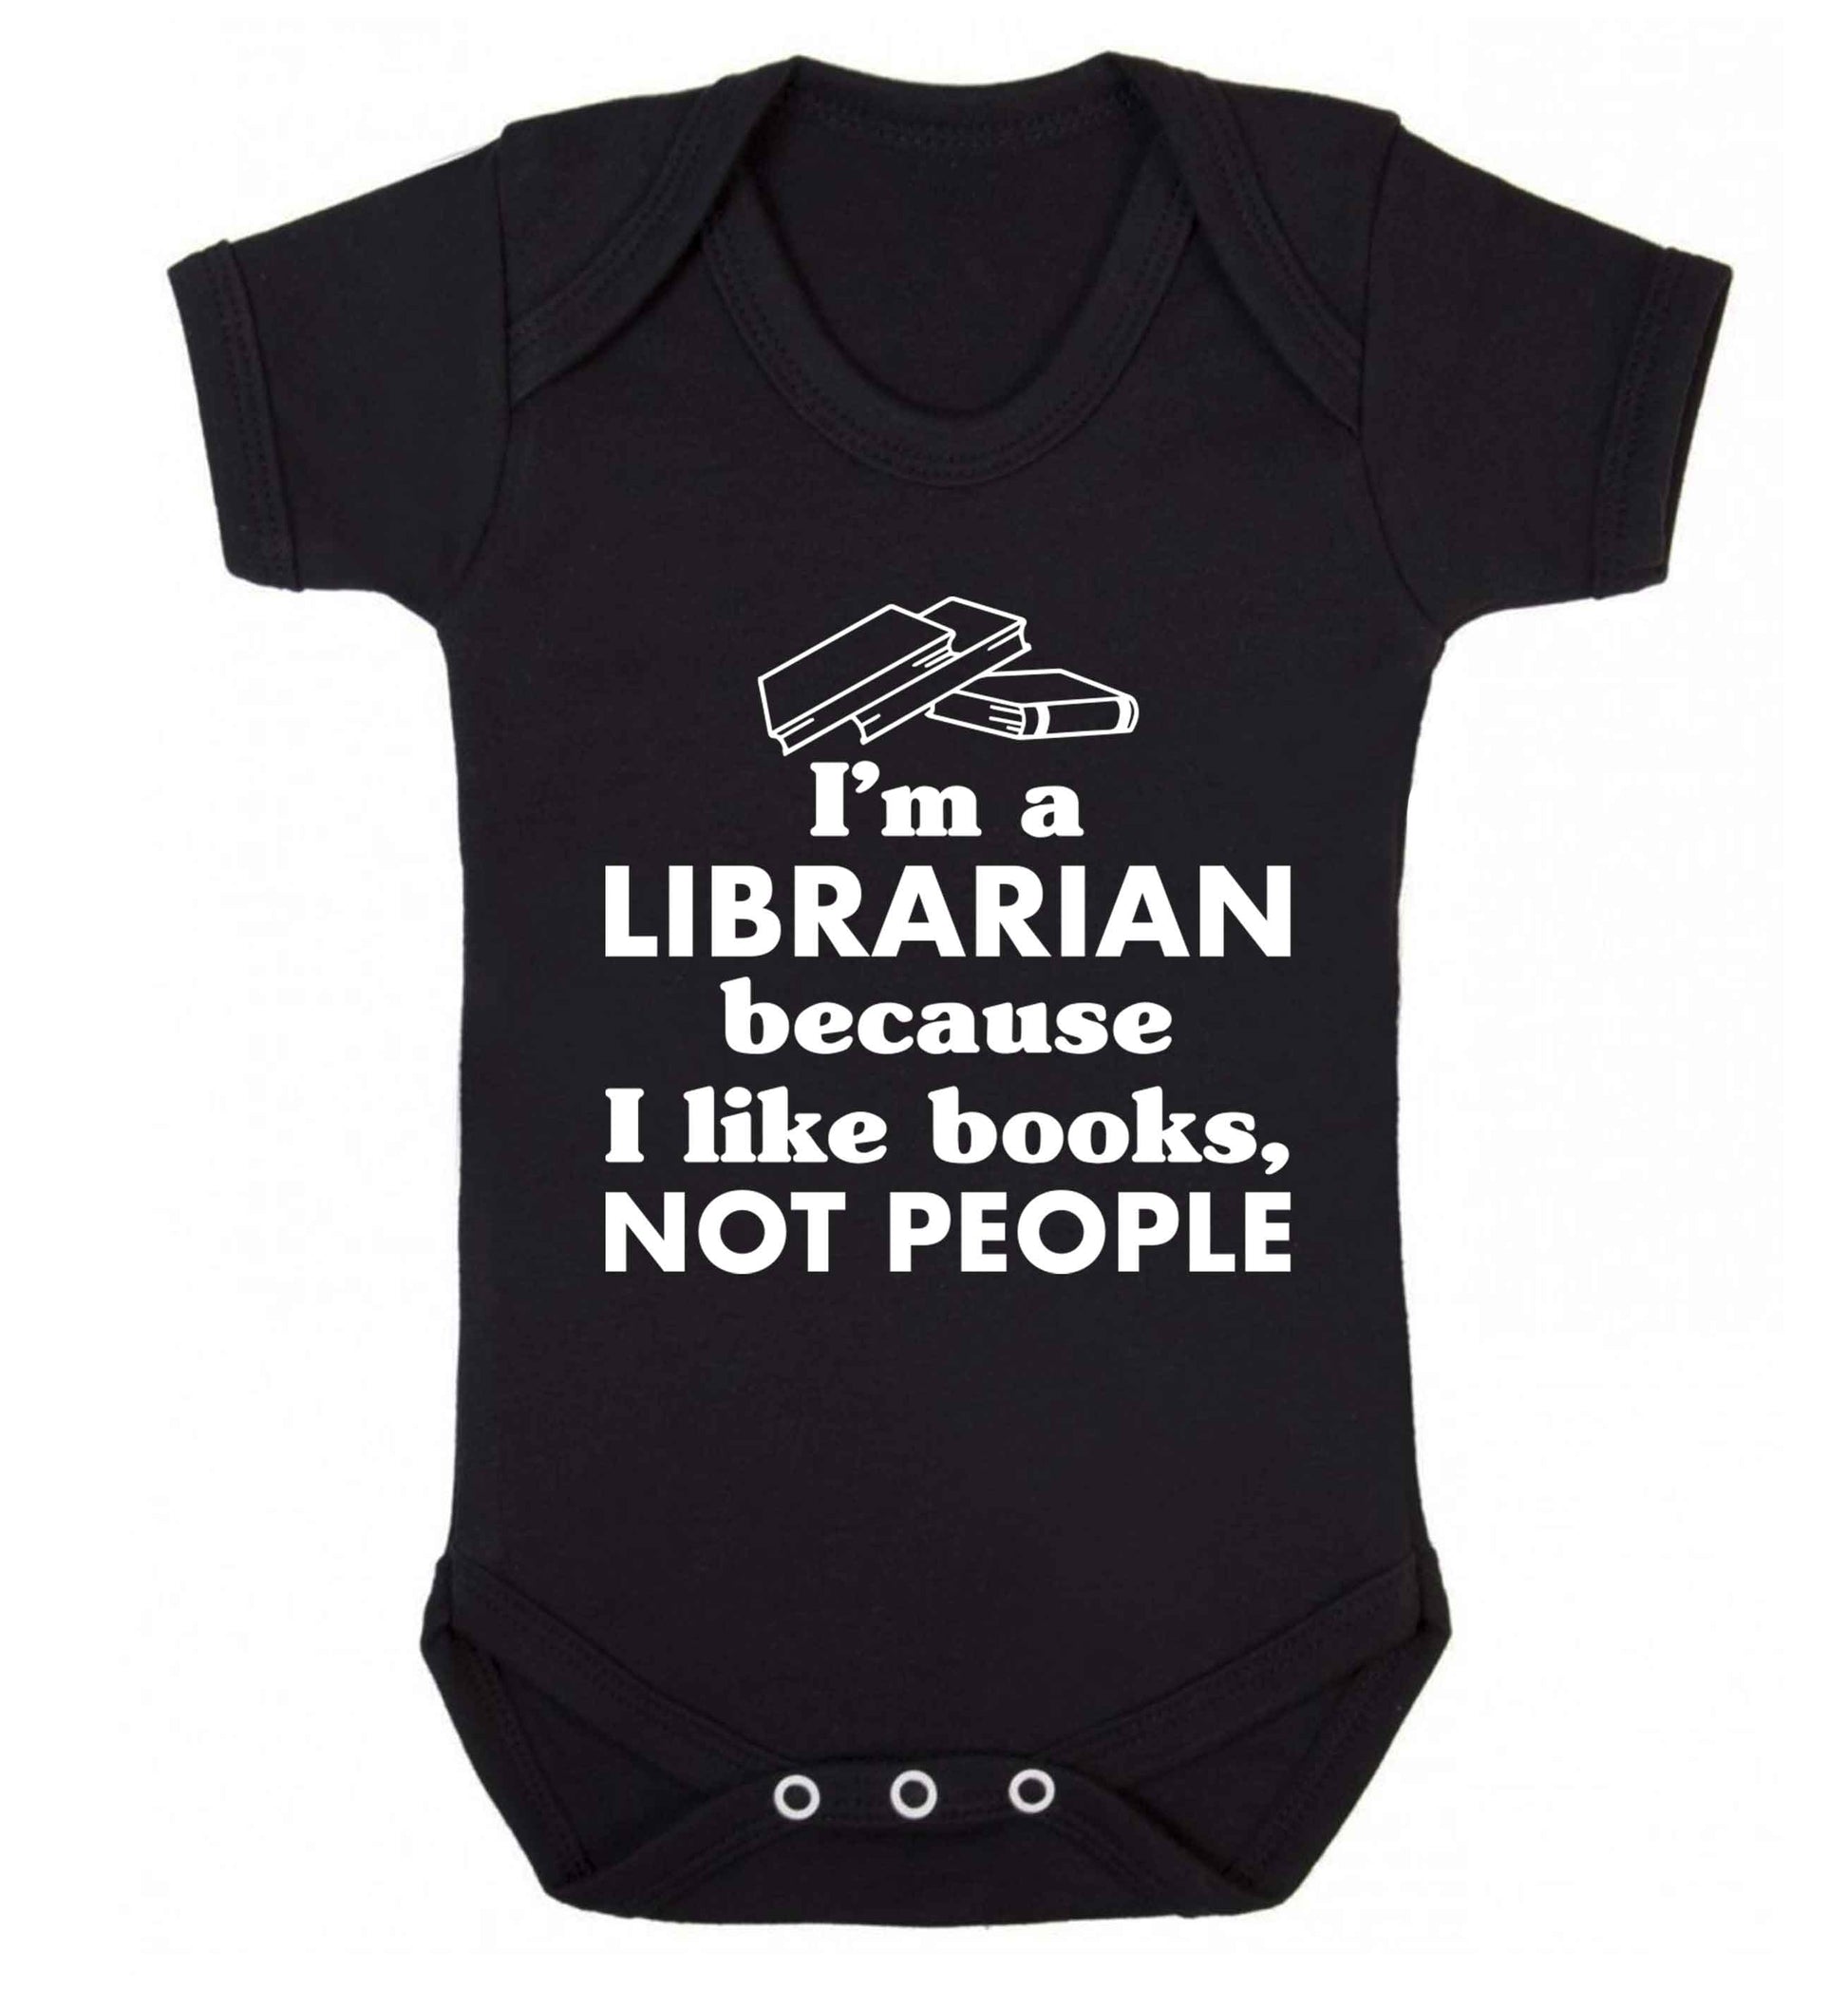 I'm a librarian because I like books not people Baby Vest black 18-24 months